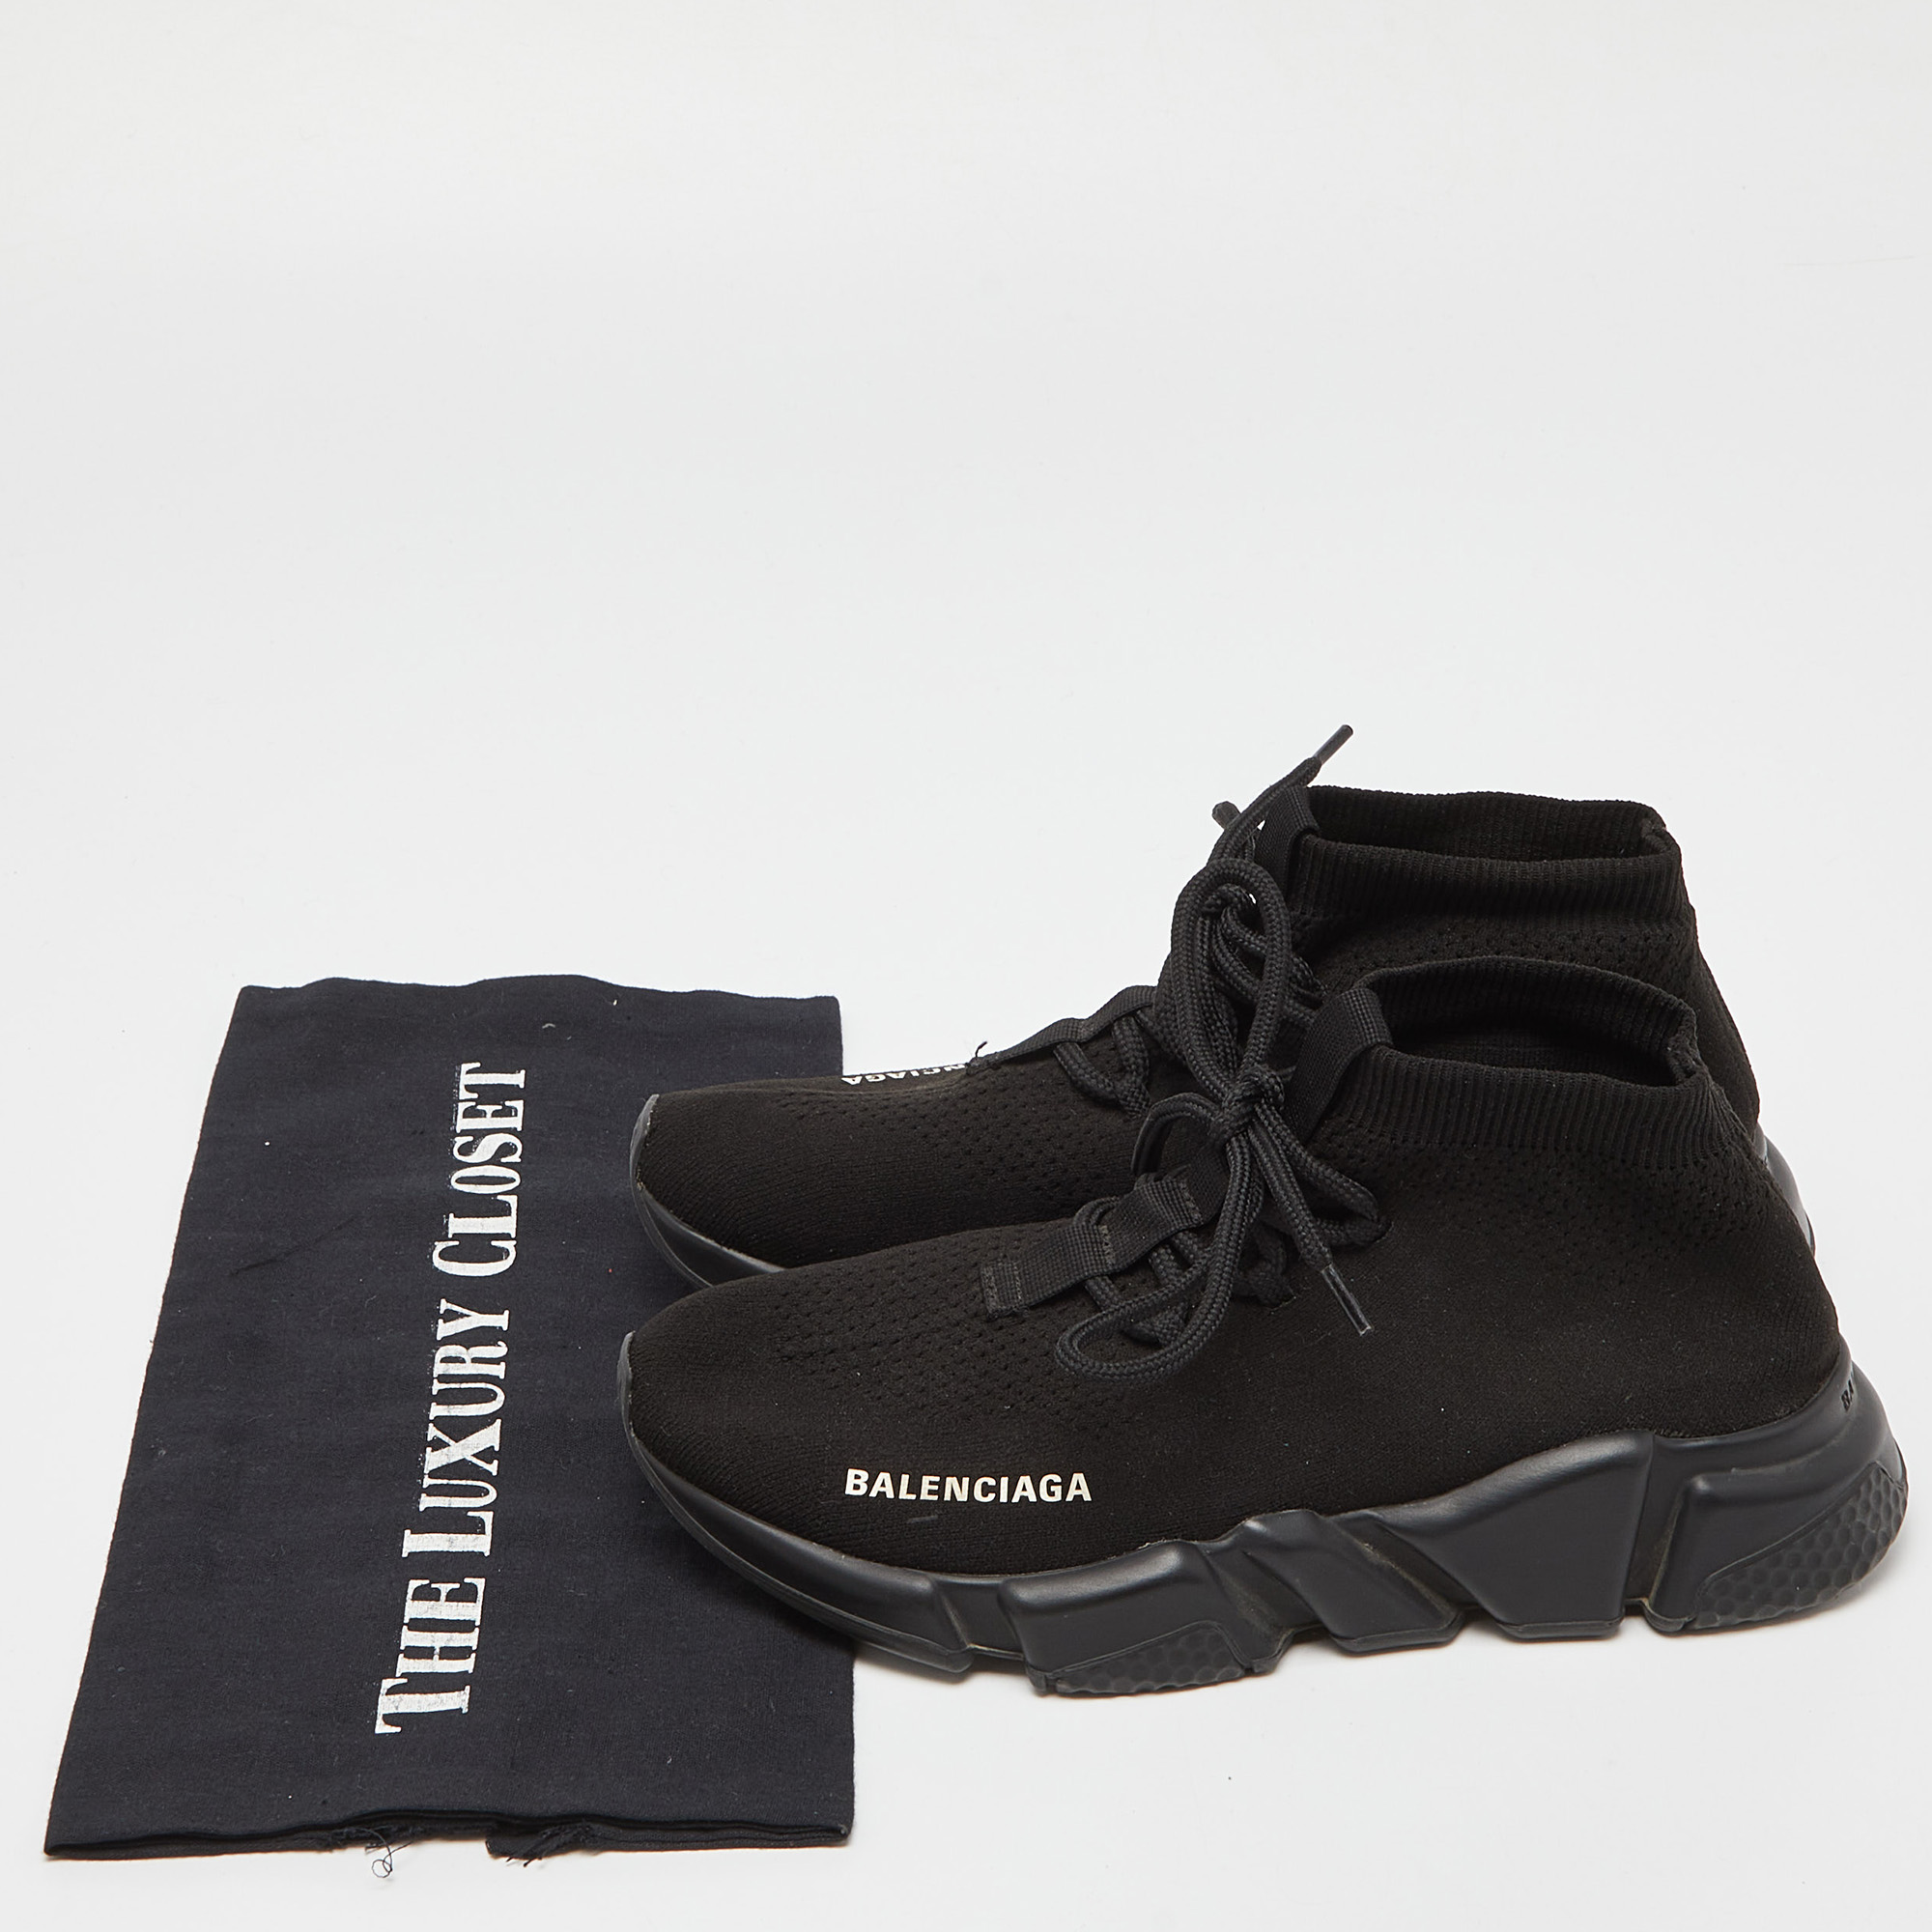 Balenciaga Black Knit Fabric Speed Trainer Lace Up Sneakers Size 37